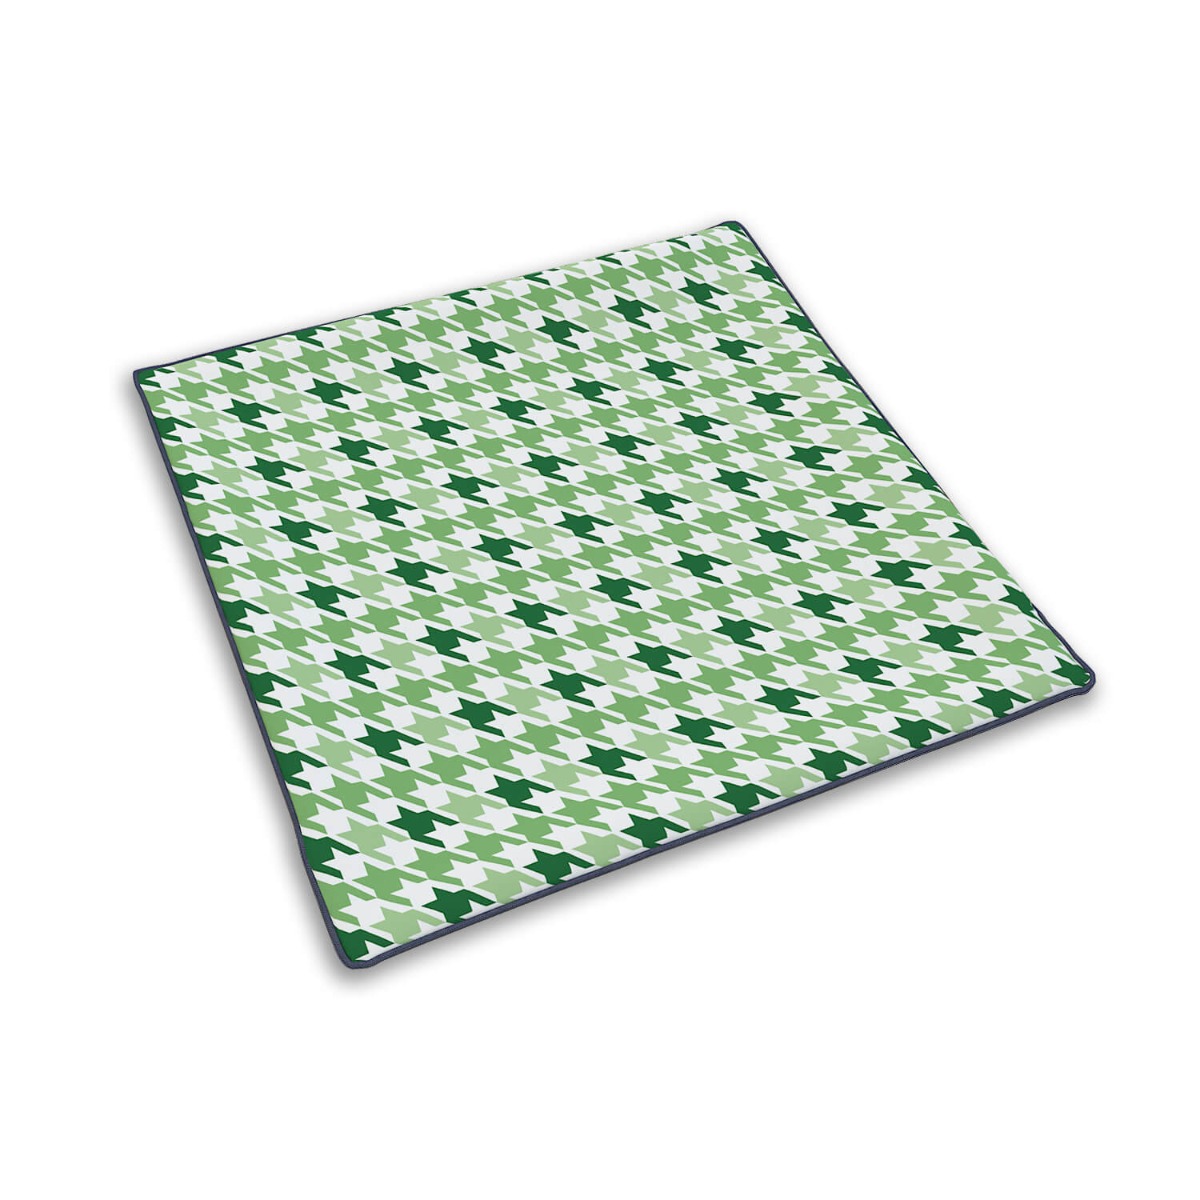 Houndstooth Pillow Cover>